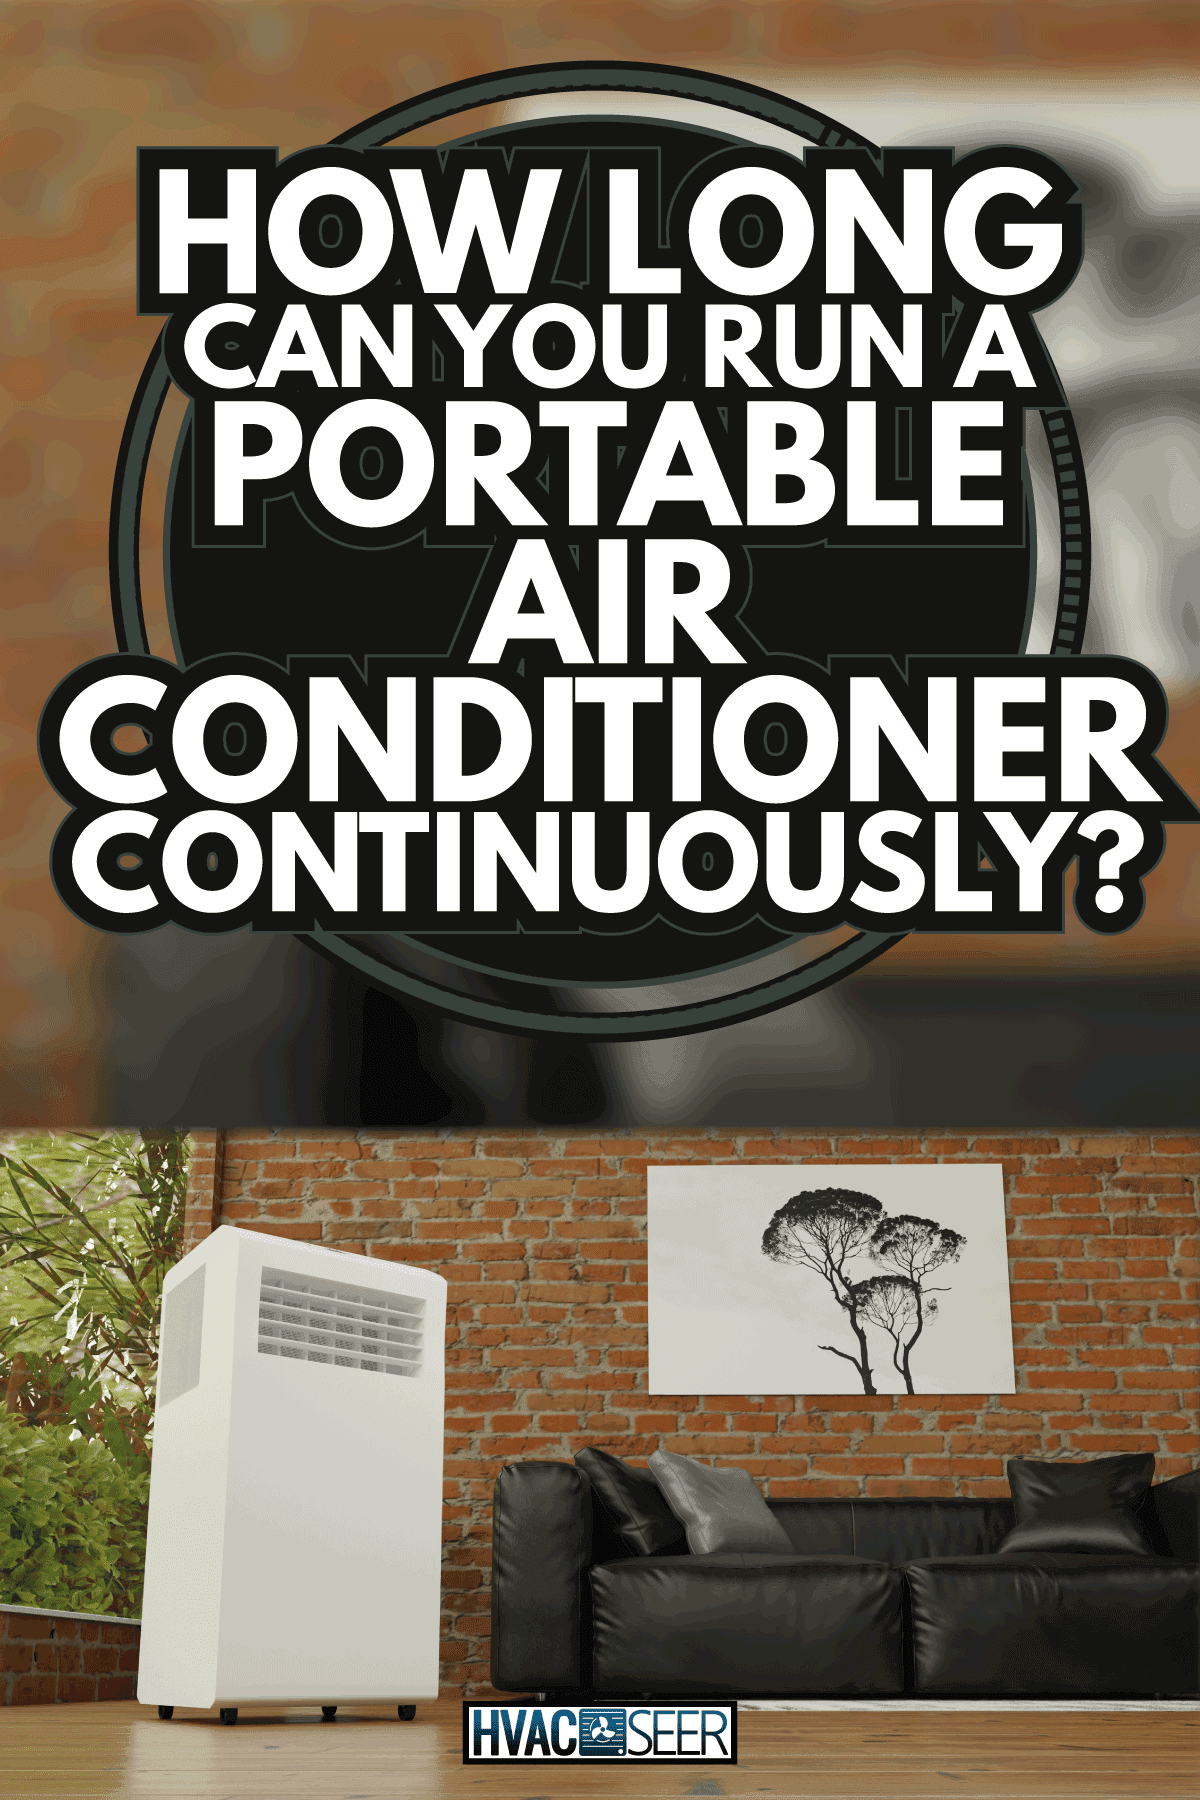 How Long Can You Run A Portable Air Conditioner Continuously? - HVACseer.com